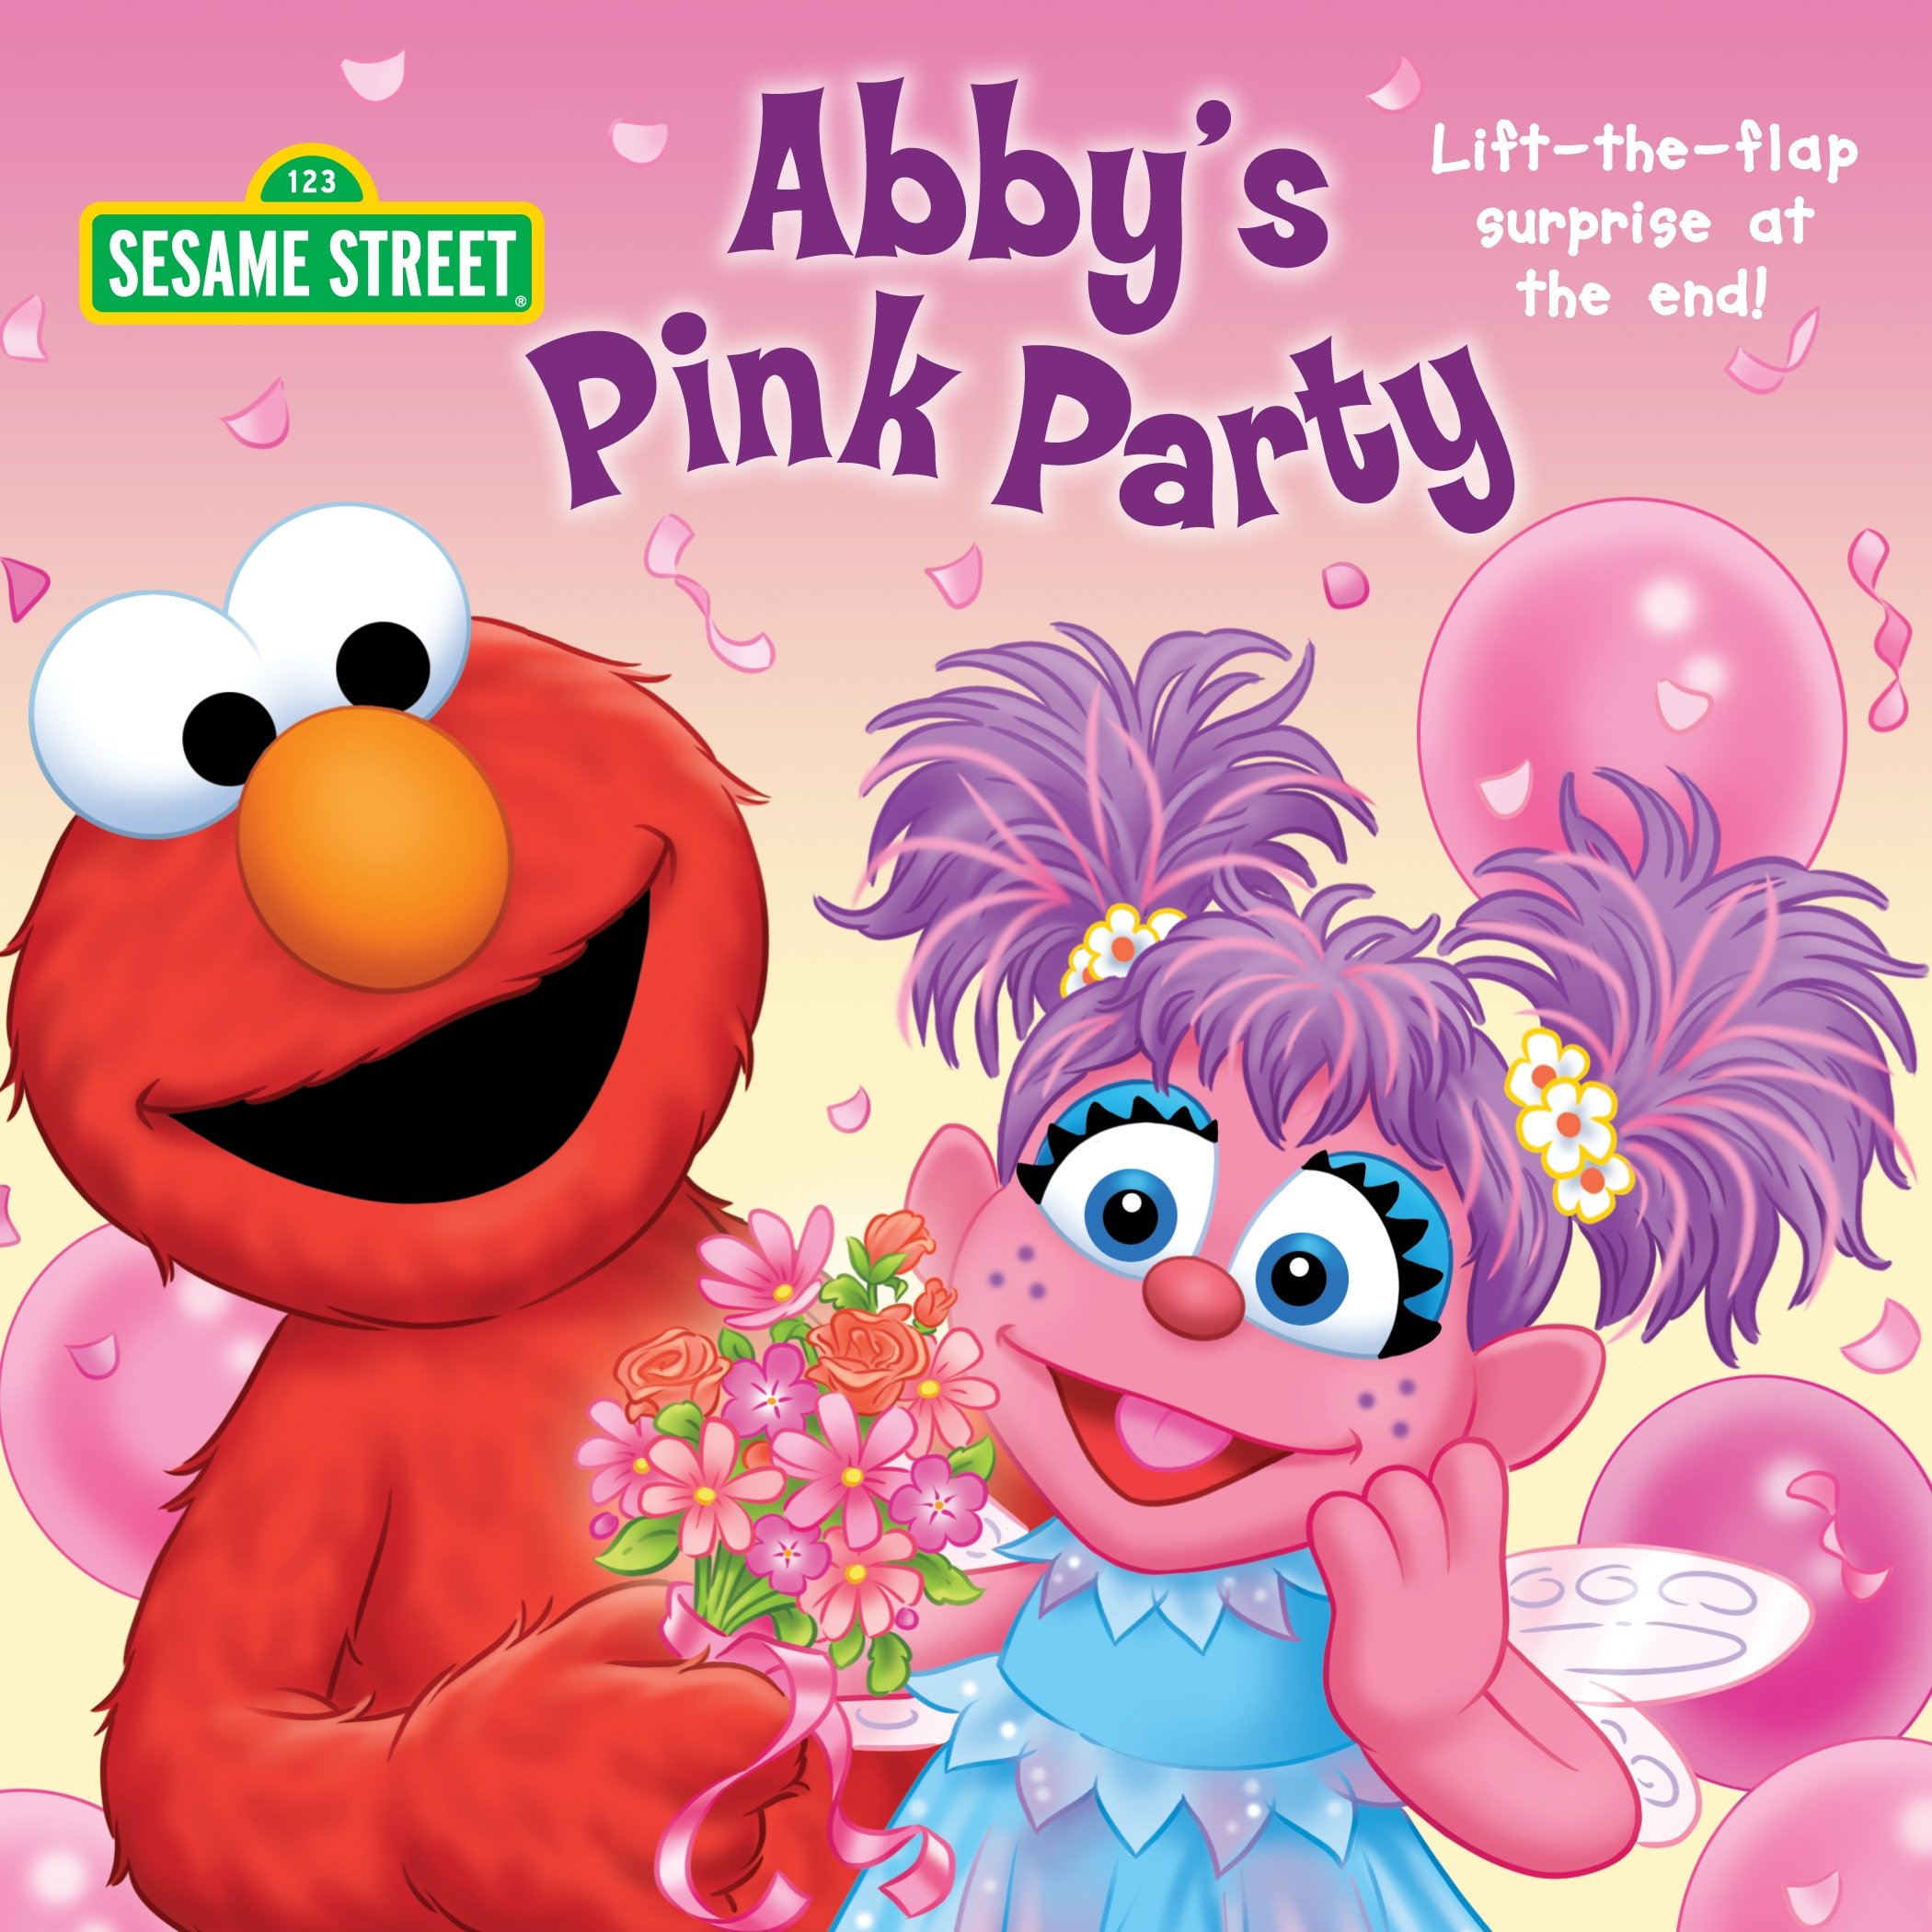 Abby's pink party cover image